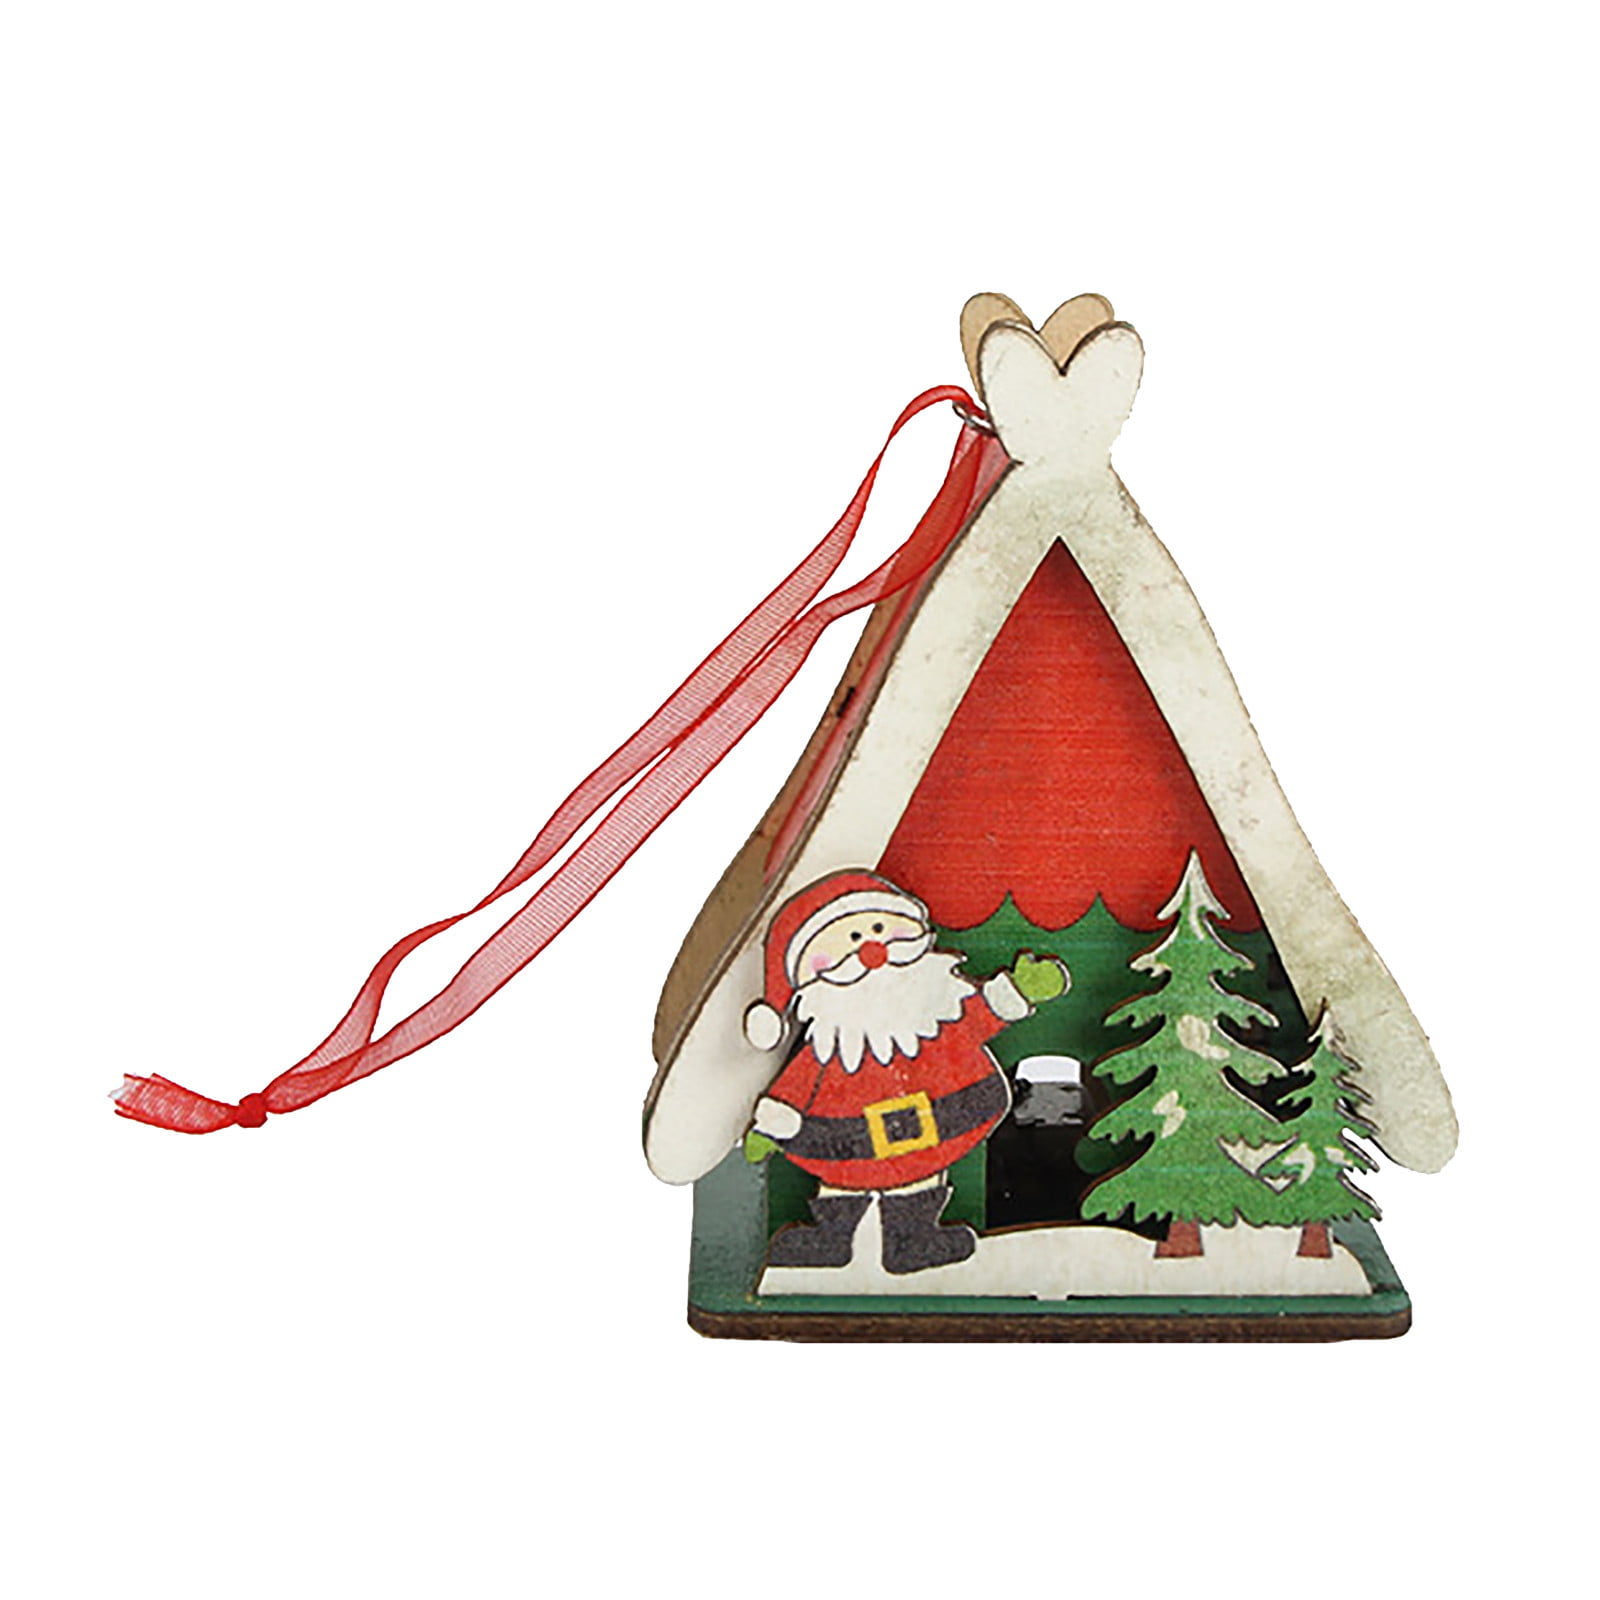 Details about   dolls house Christmas tree decorations 